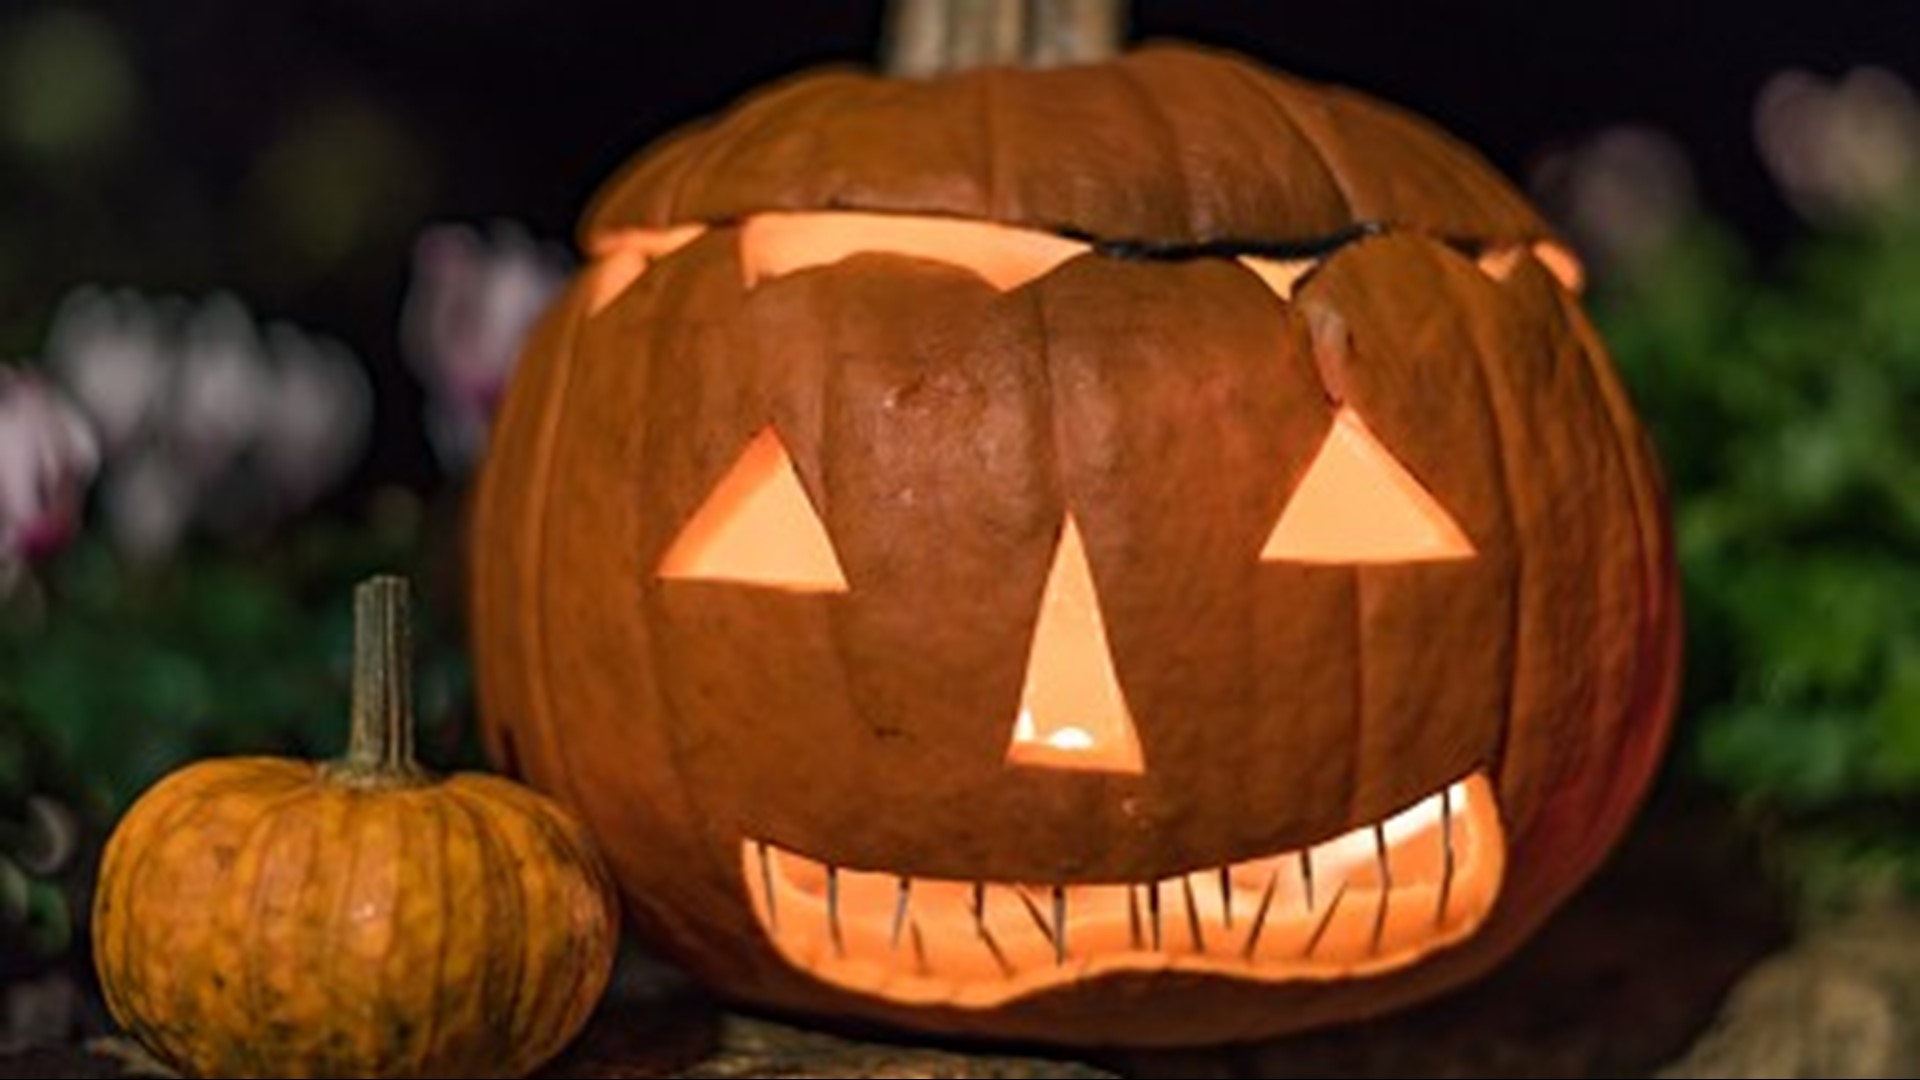 Still planless this Halloween? Don't worry, we've got a list of what's going on across Central Texas this Oct. 31.